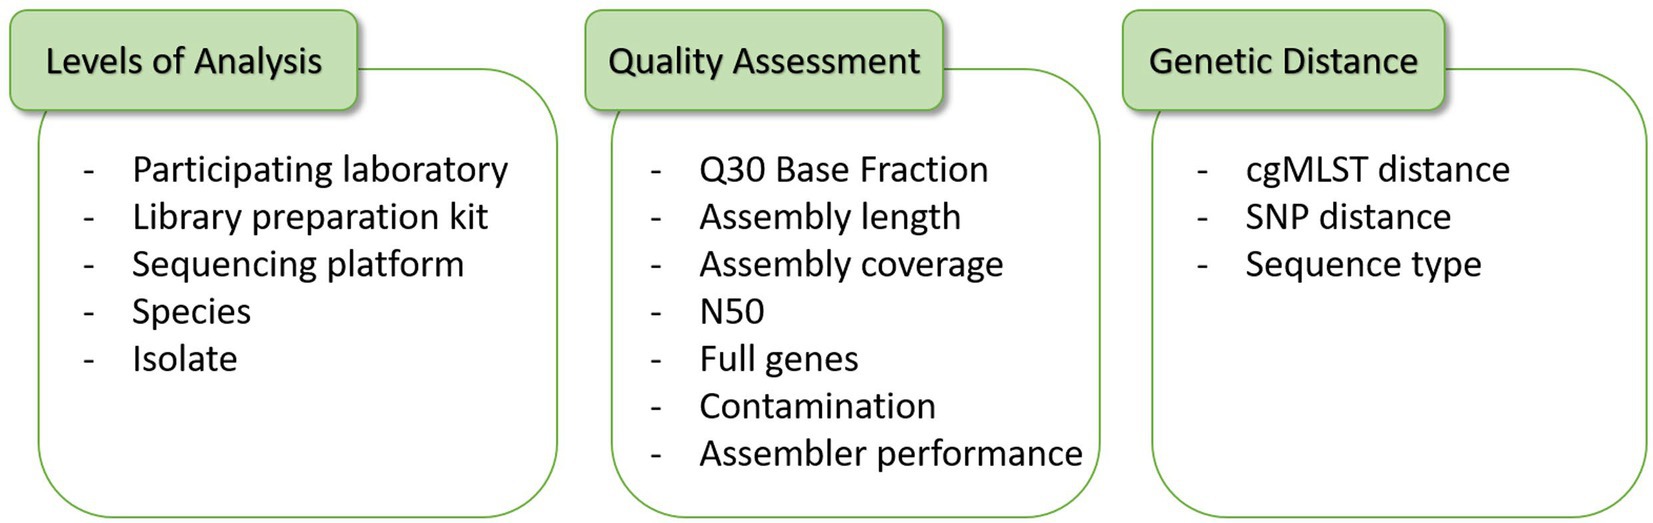 Frontiers | Impact of wet-lab protocols on quality of whole-genome